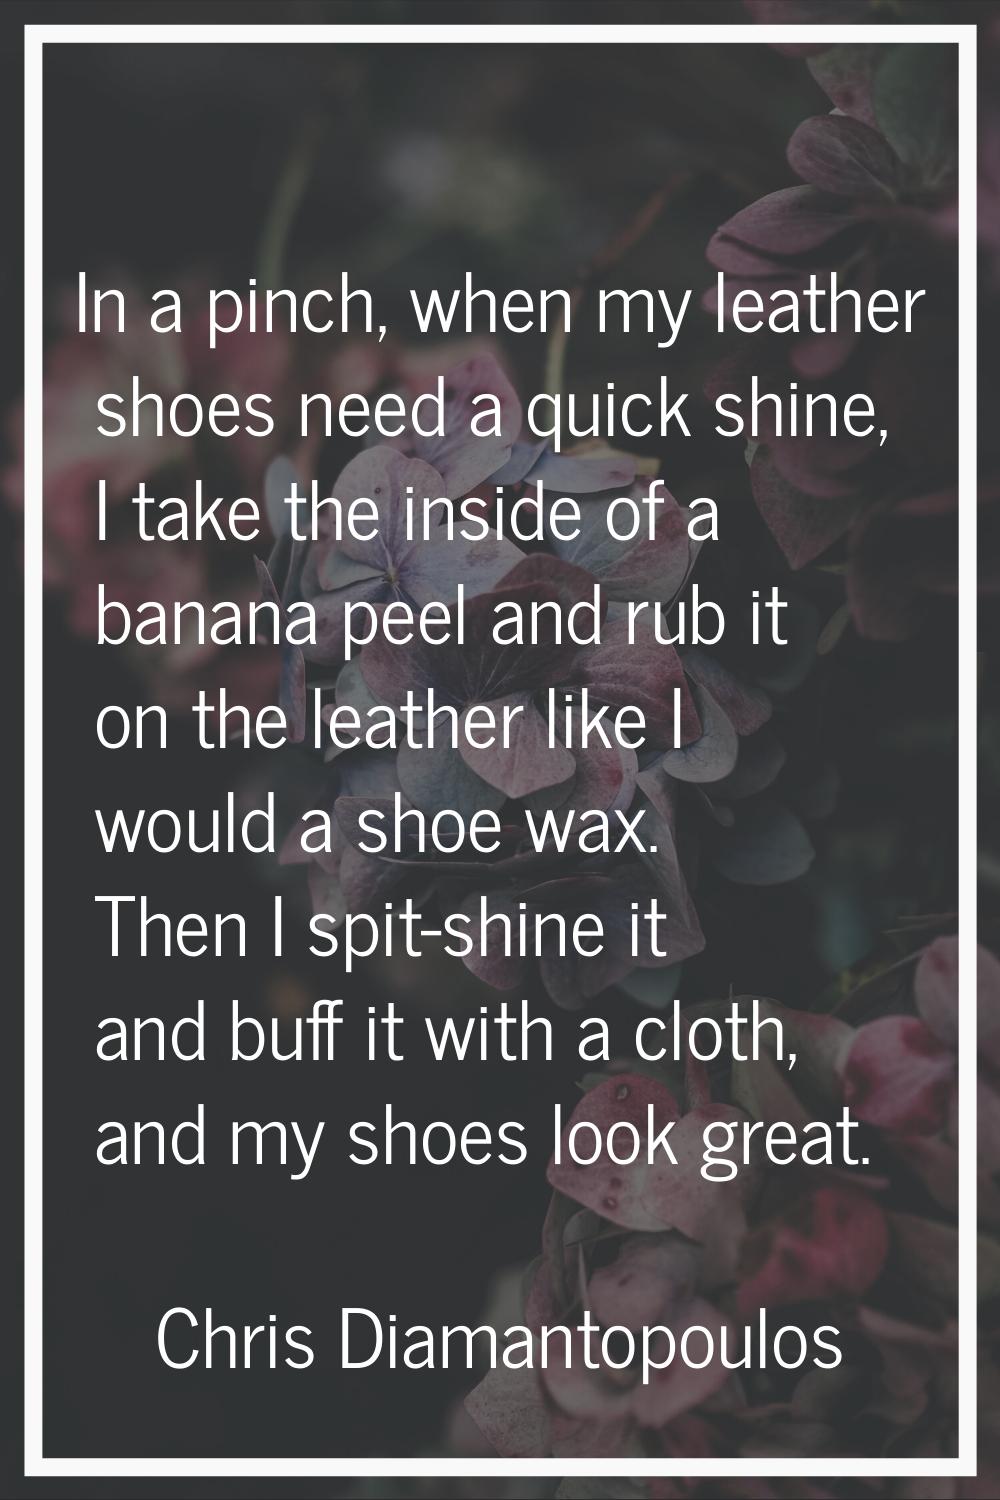 In a pinch, when my leather shoes need a quick shine, I take the inside of a banana peel and rub it